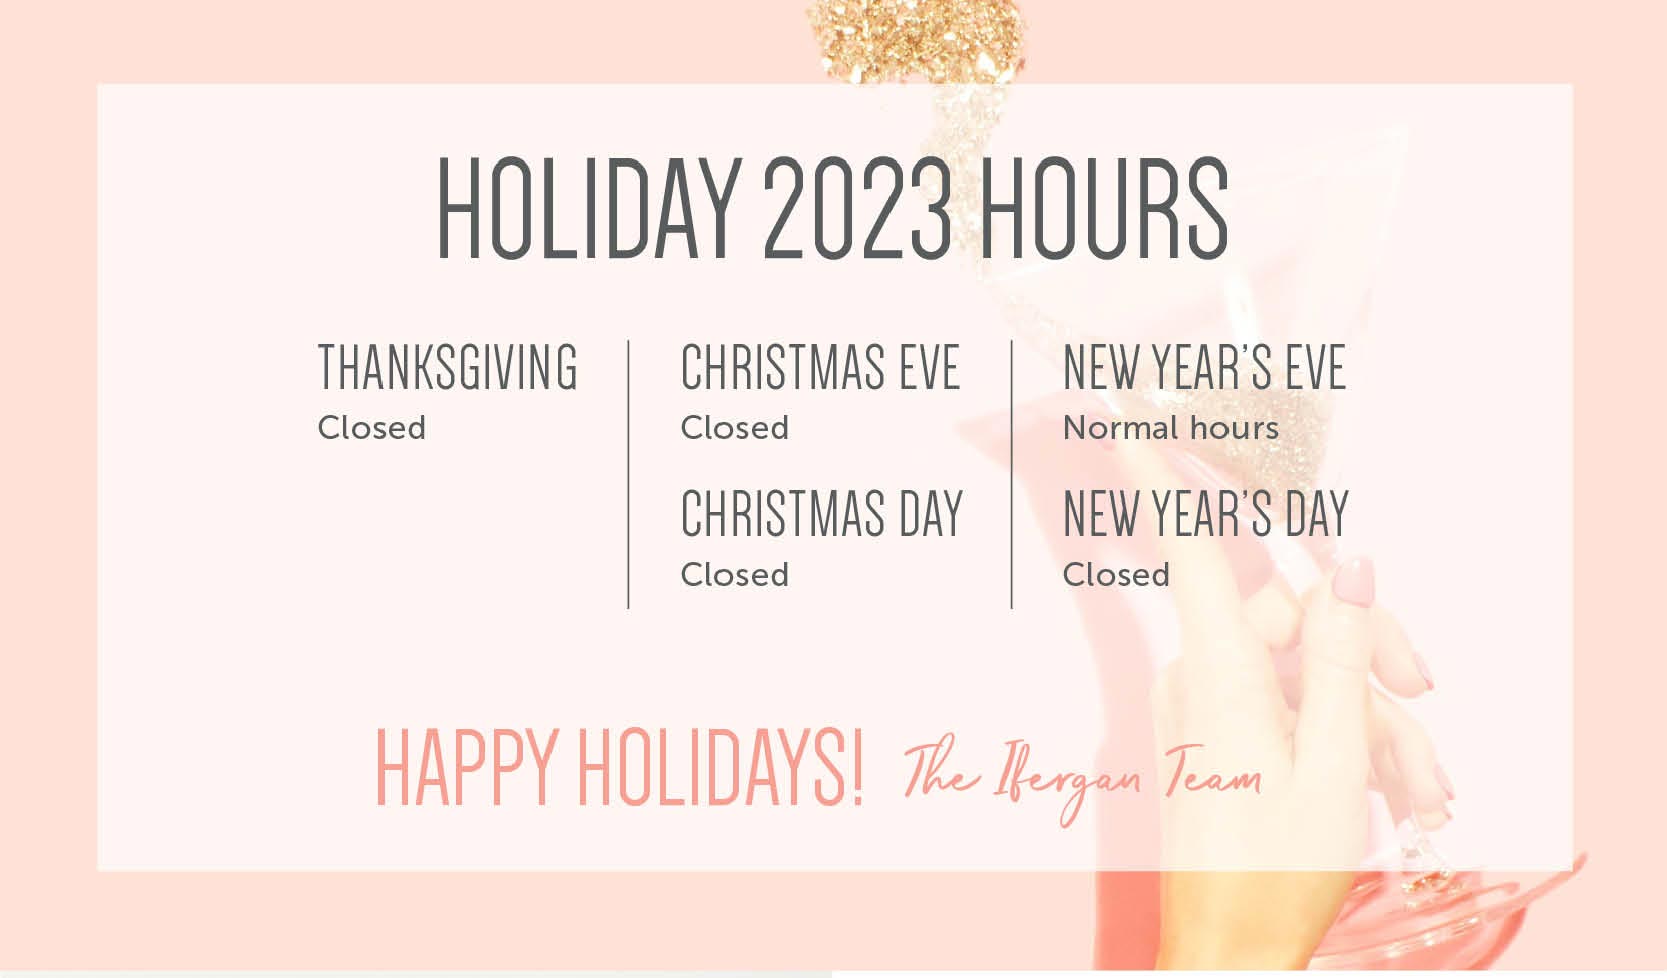 2023 Holiday Salon Hours - Charles Ifergan Salons will be closed on Thanksgiving day, Christmas Eve, Christmas Day and New Year's Day. With normal hours on New Years Eve. 